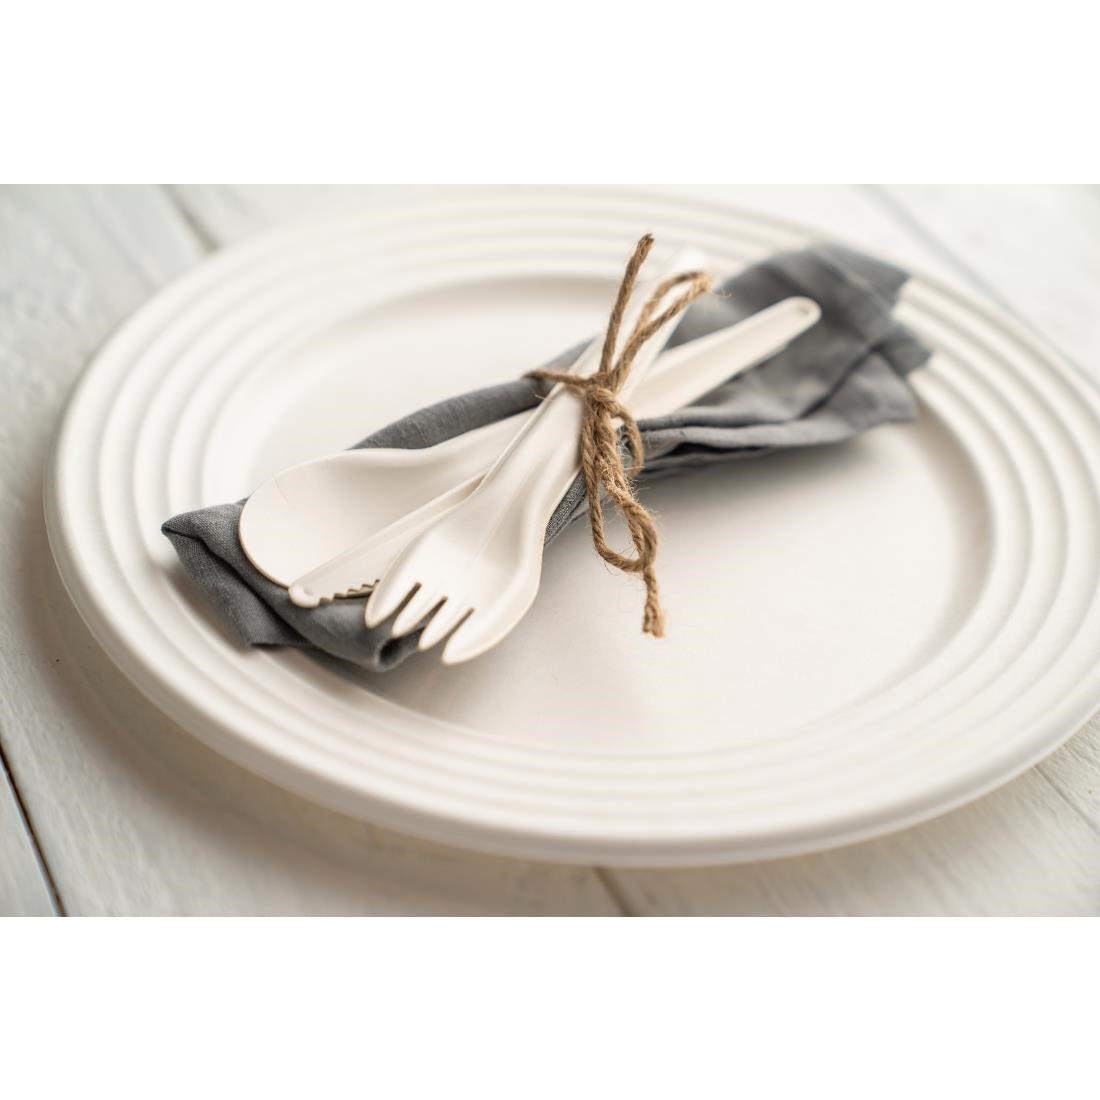 CU494 Sabert Recyclable Paper Cutlery Fork (Pack of 1000) JD Catering Equipment Solutions Ltd